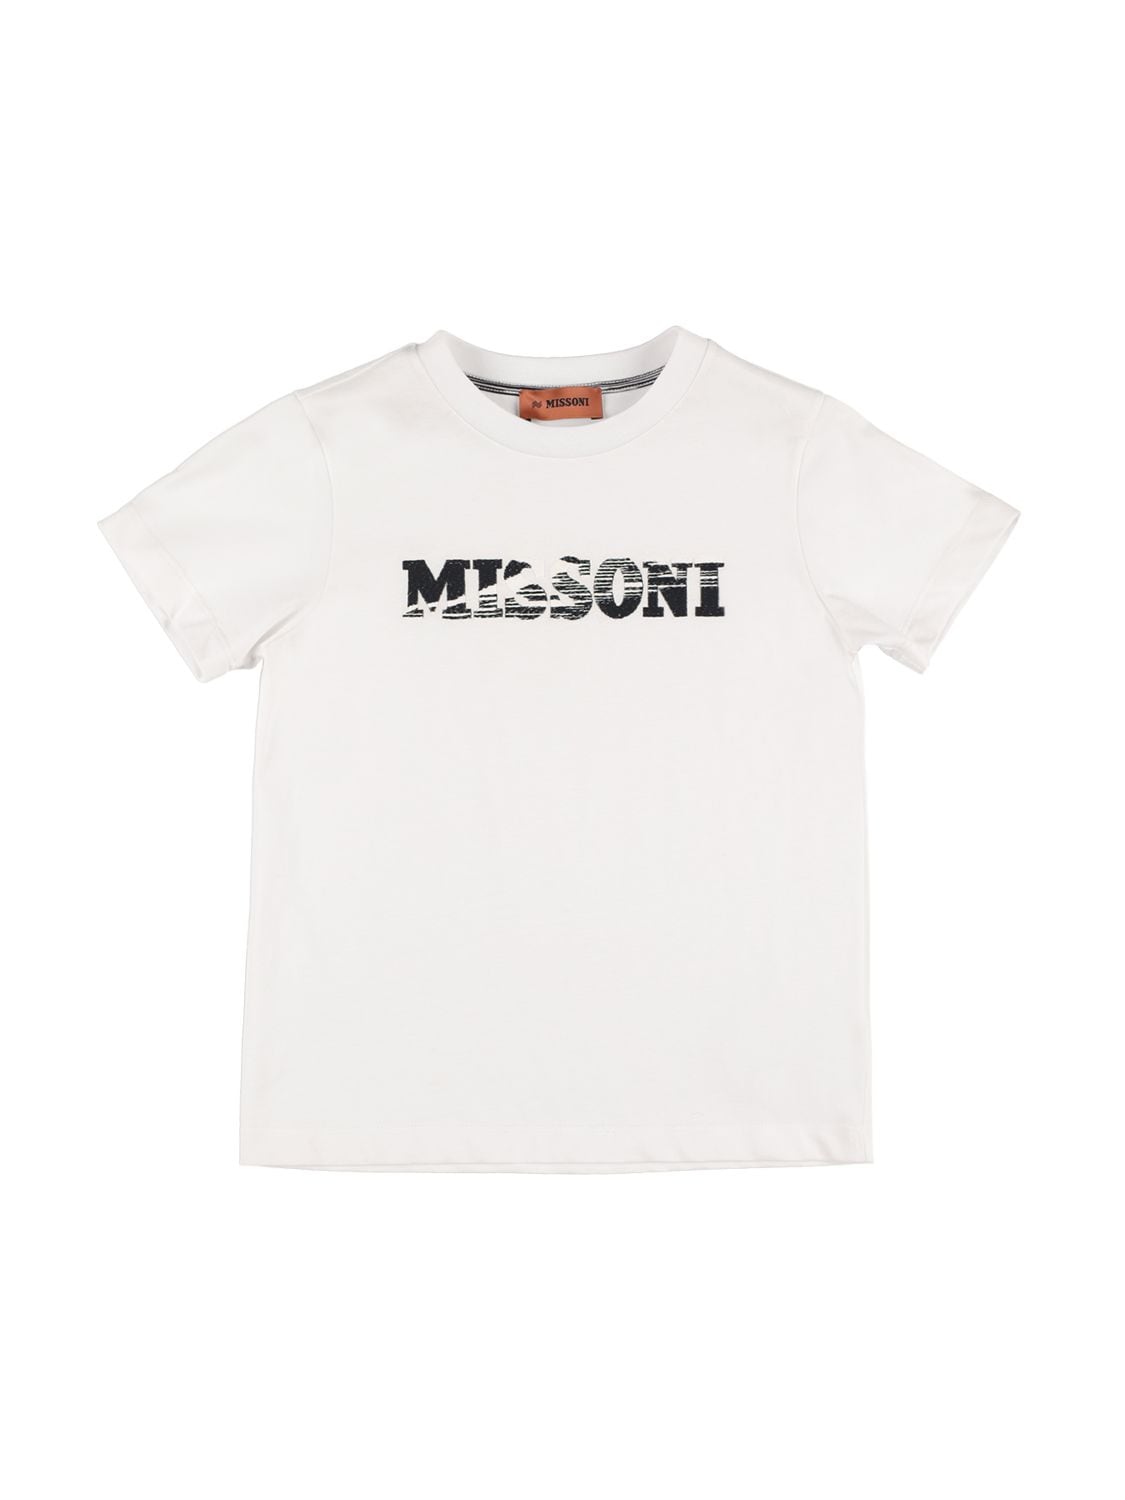 Missoni Kids' Embroidered Cotton Jersey T-shirt In White